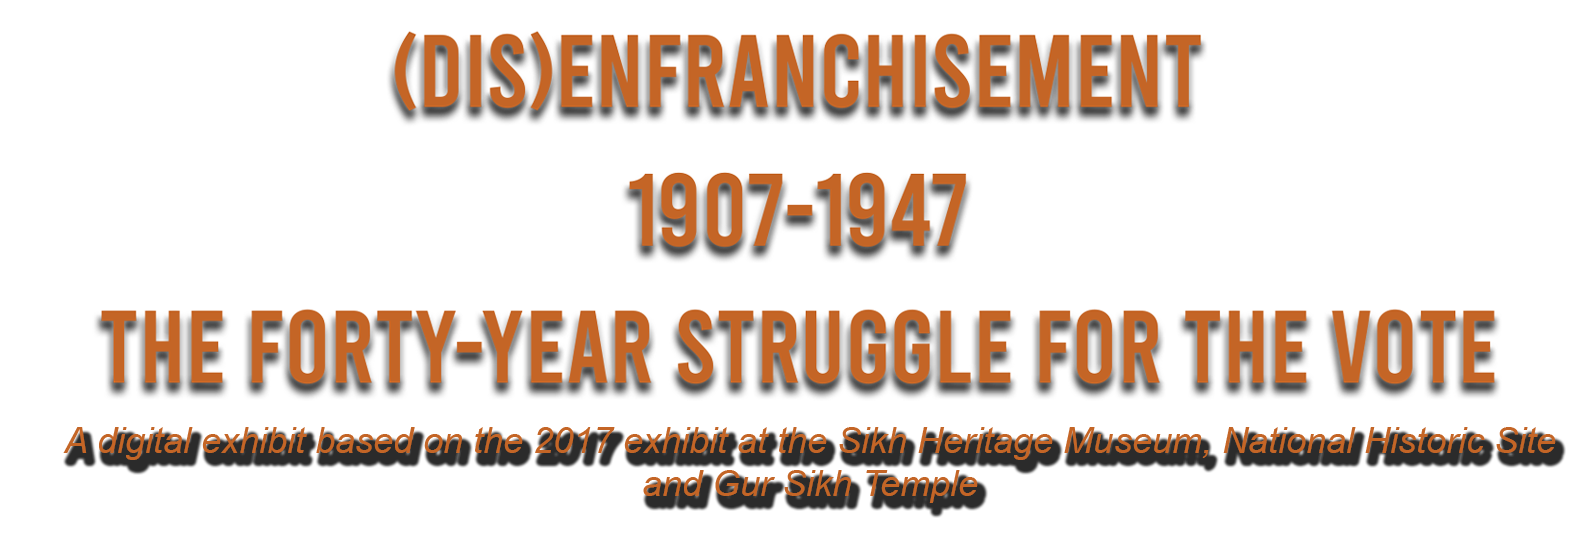 Disenfranchisment 1907-1947: The Forty-Year Struggle for the Vote. A digital exhibit based on the 2017 exhibit at the Sikh Heritage Museum, National Historic Site and Gur Sikh Temple